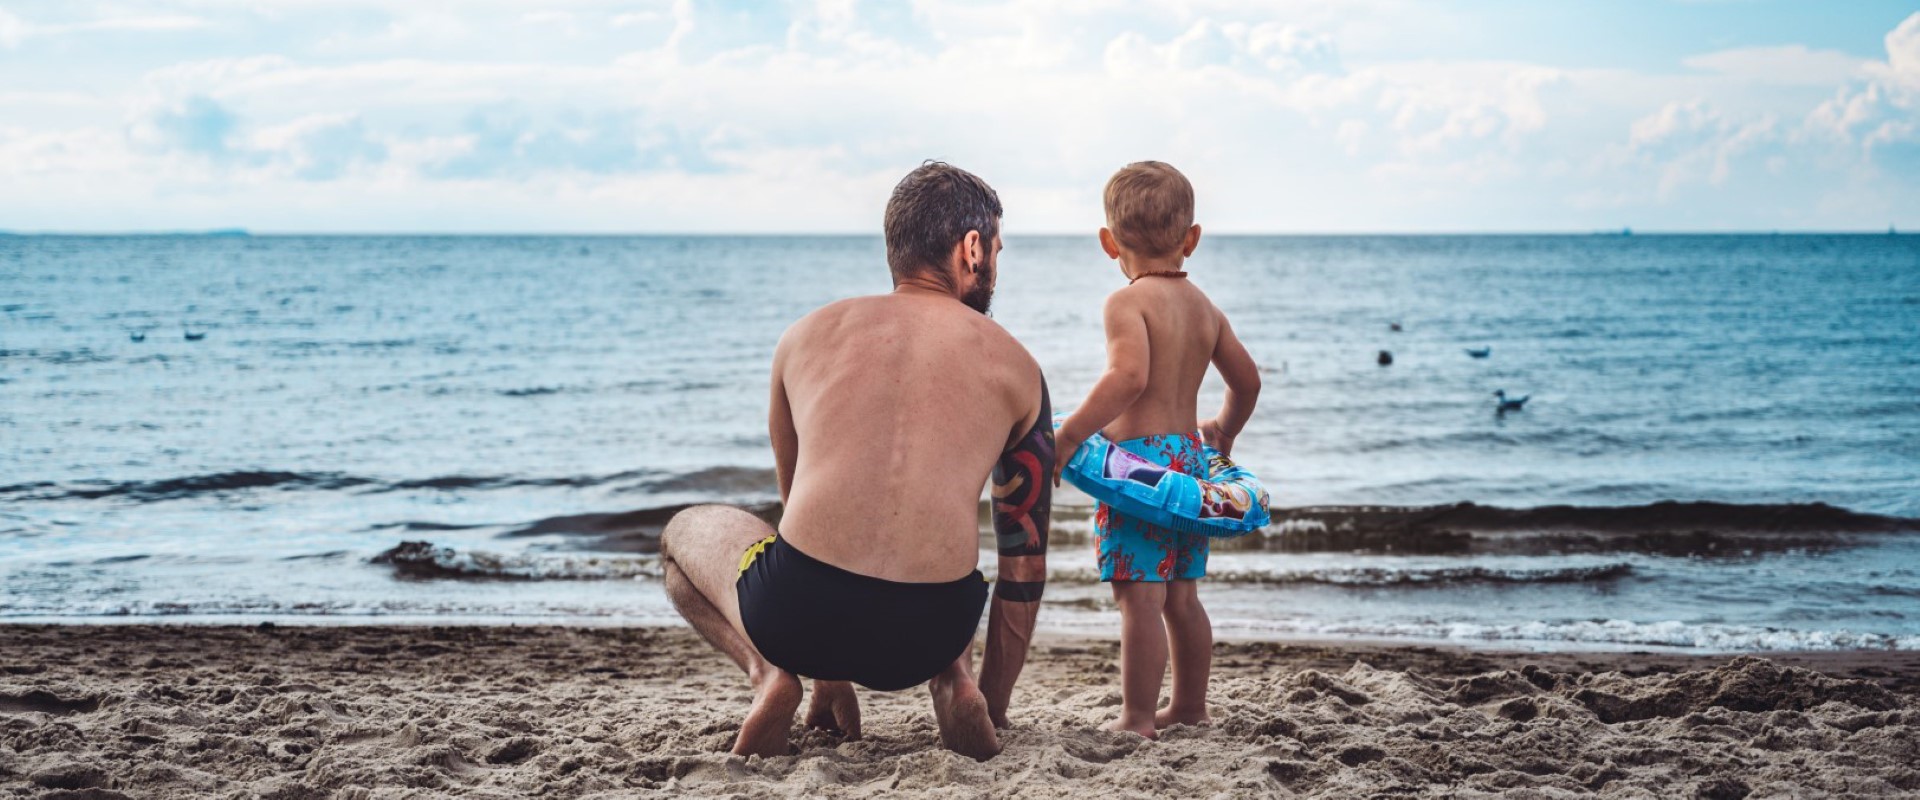 We see a father and son on the beach looking out at the sea in the image.